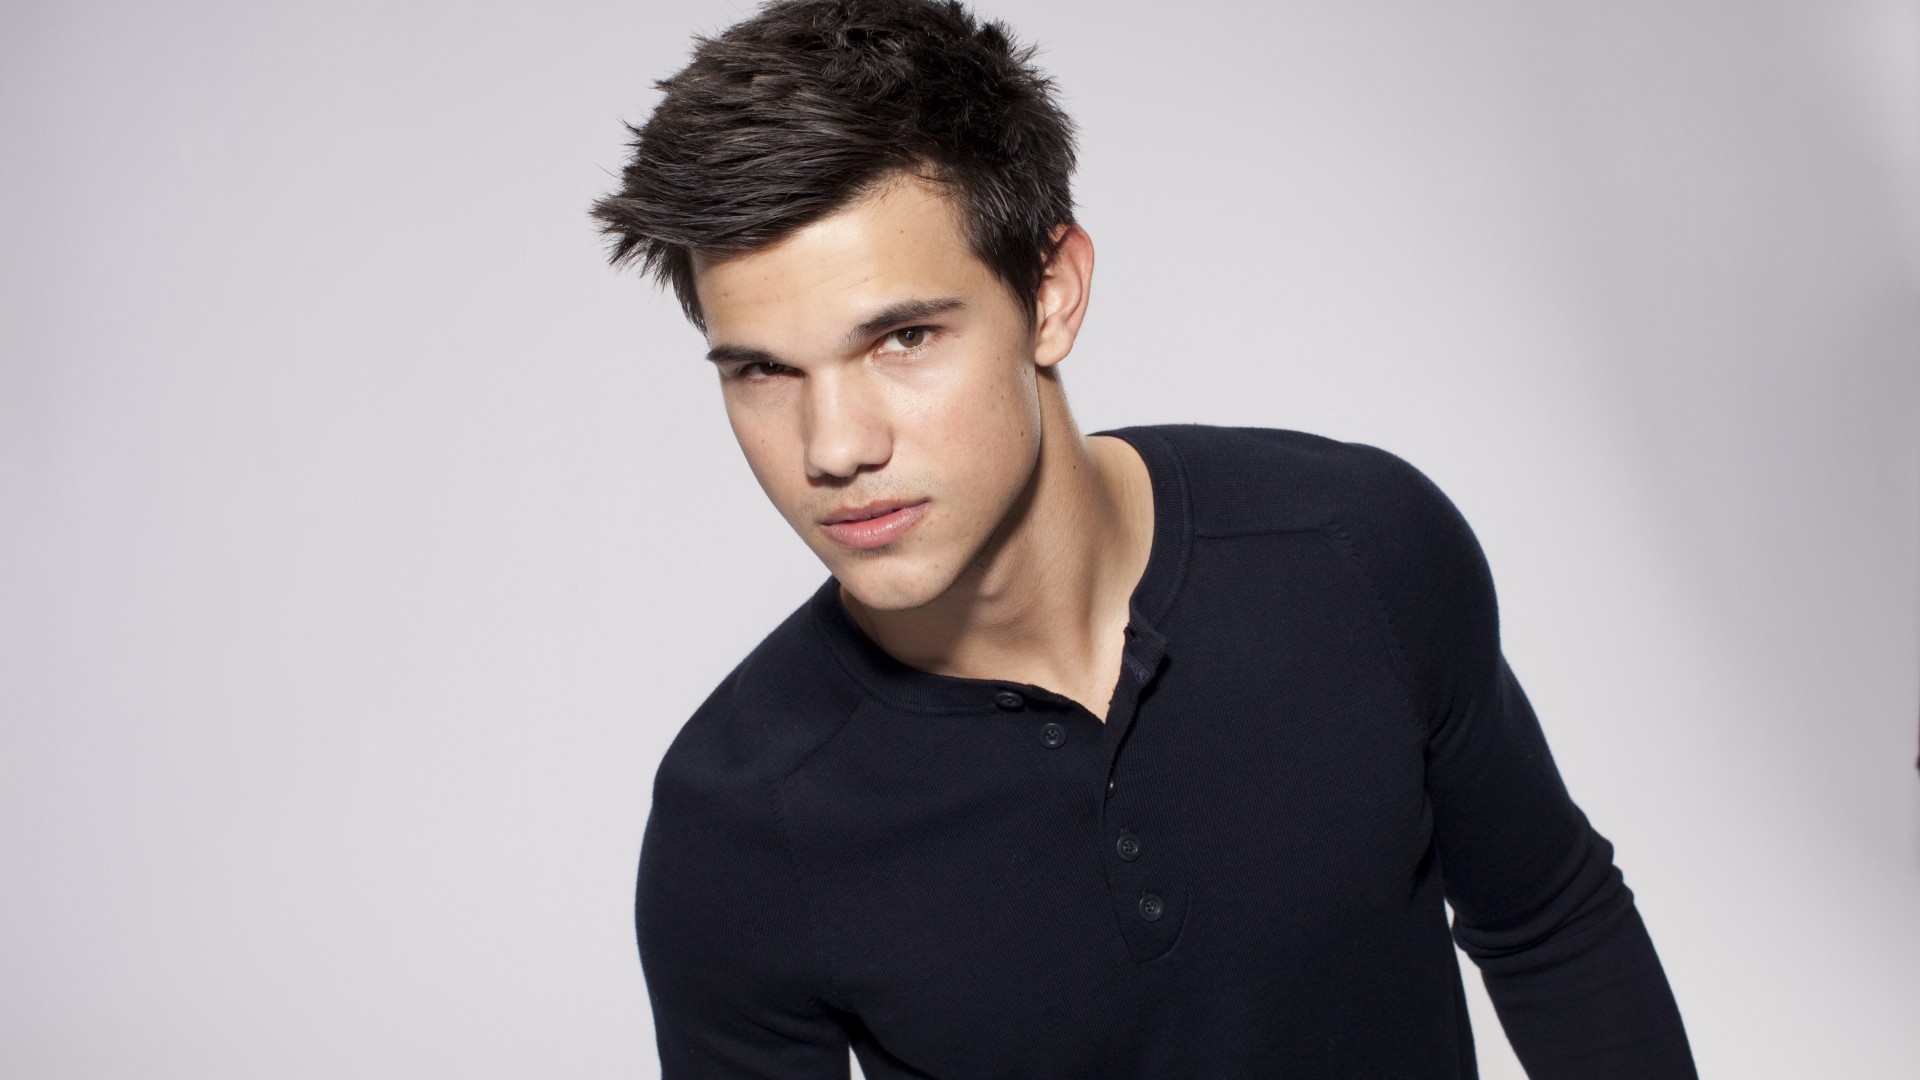 Taylor Lautner, Top Fashion Male Models, Most Popular Celebs in 2015, actor, model, Run the Tide 2015, The Twilight Saga (horizontal)